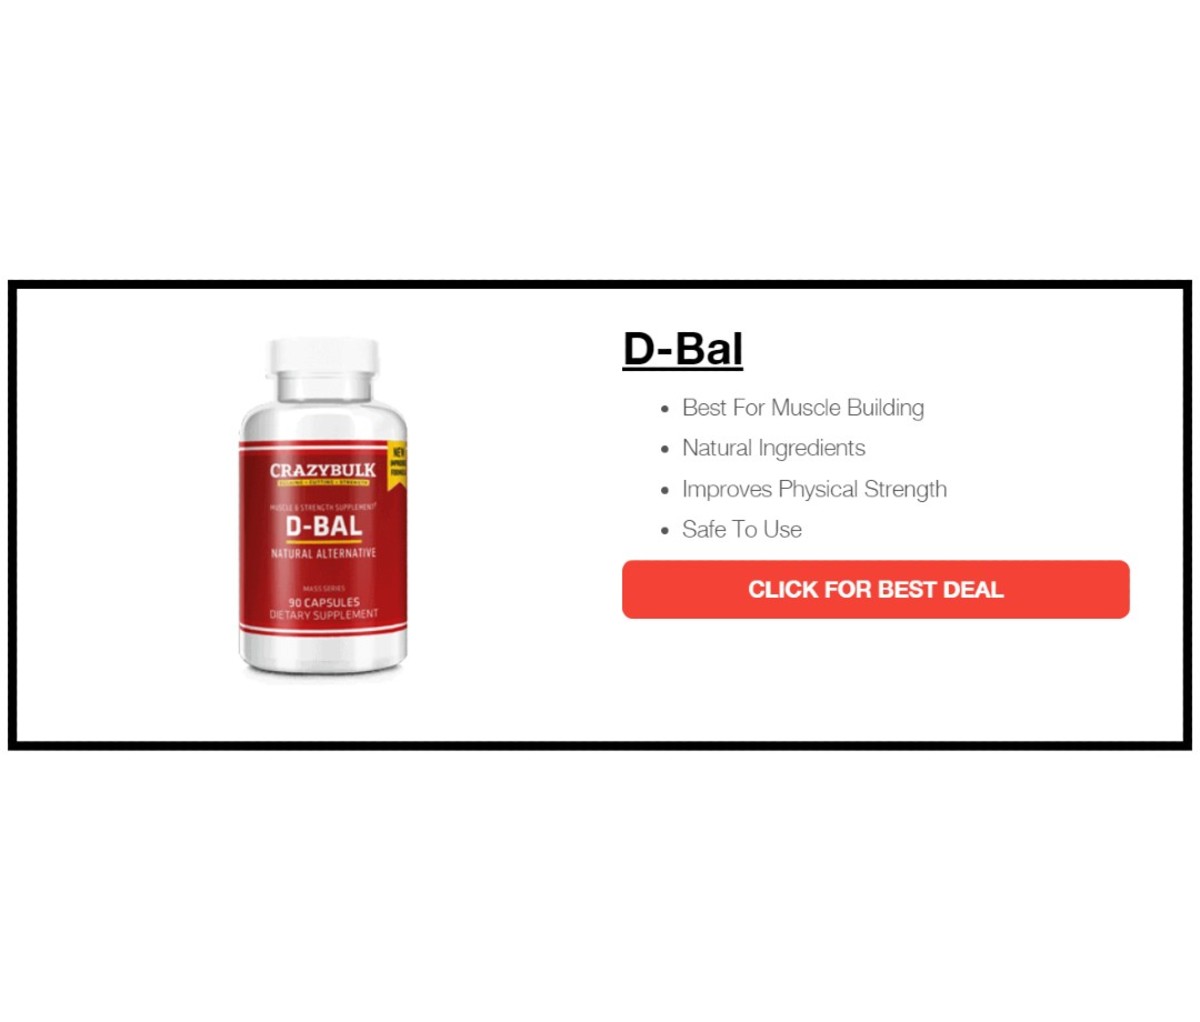 D-Bal - Natural Steroids For Bulking & Muscle Building